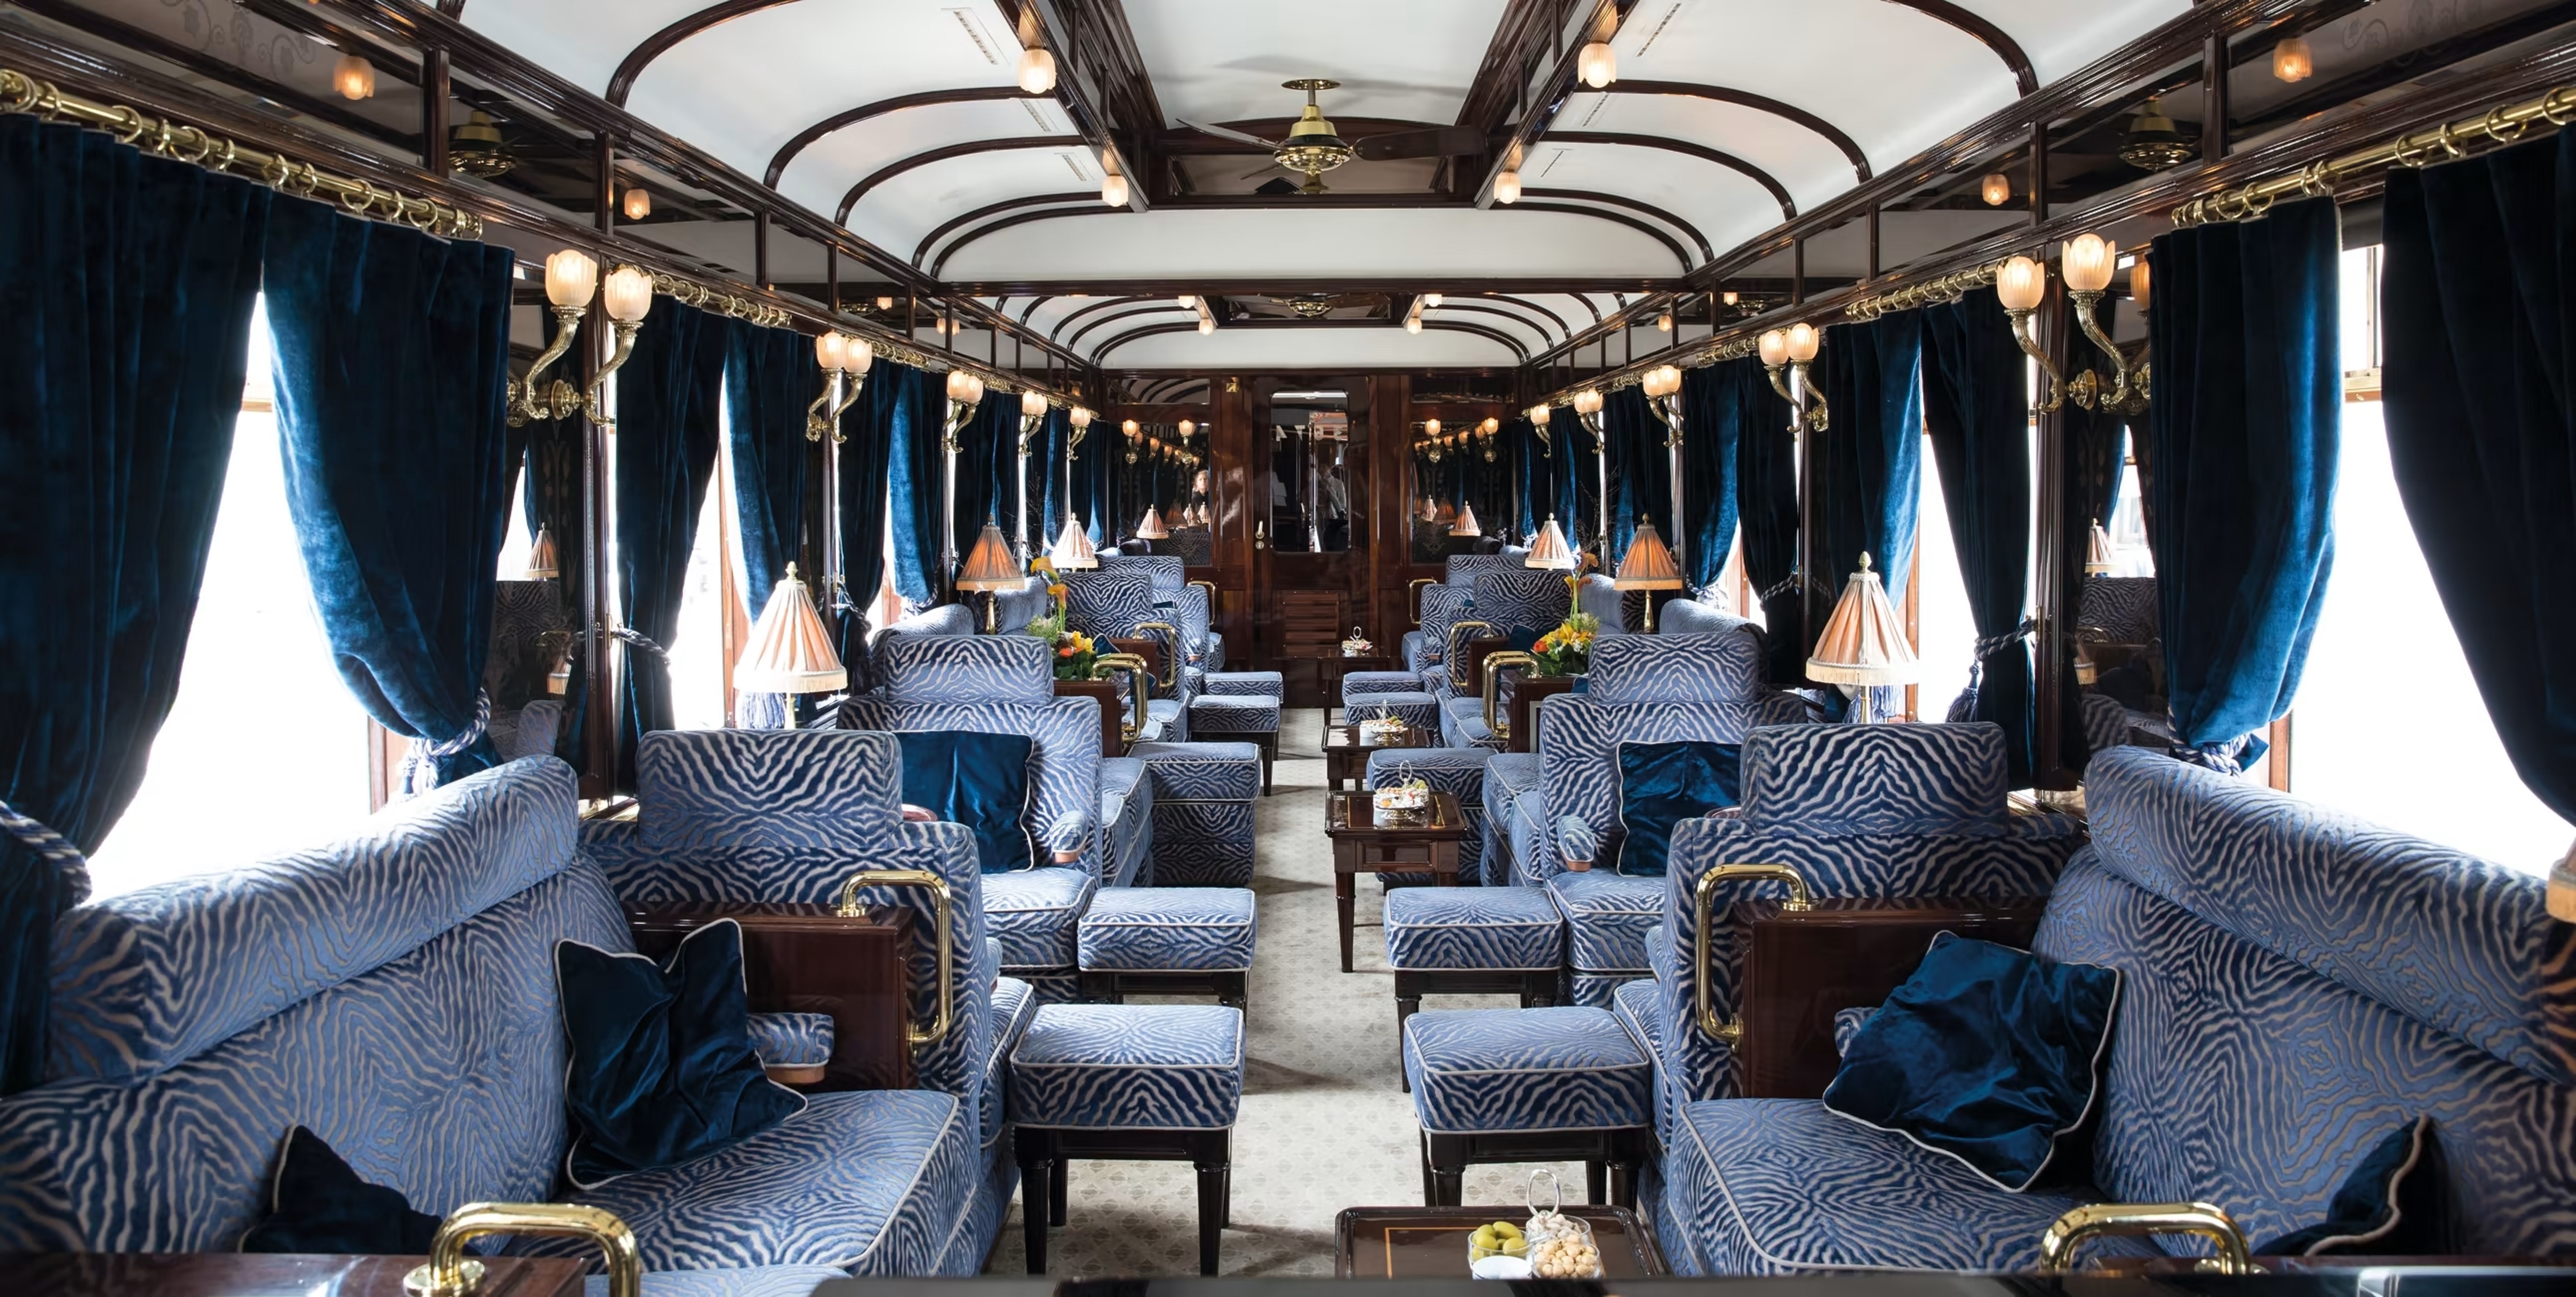 Belmond inaugurates a new rail route at the bottom of the Alps